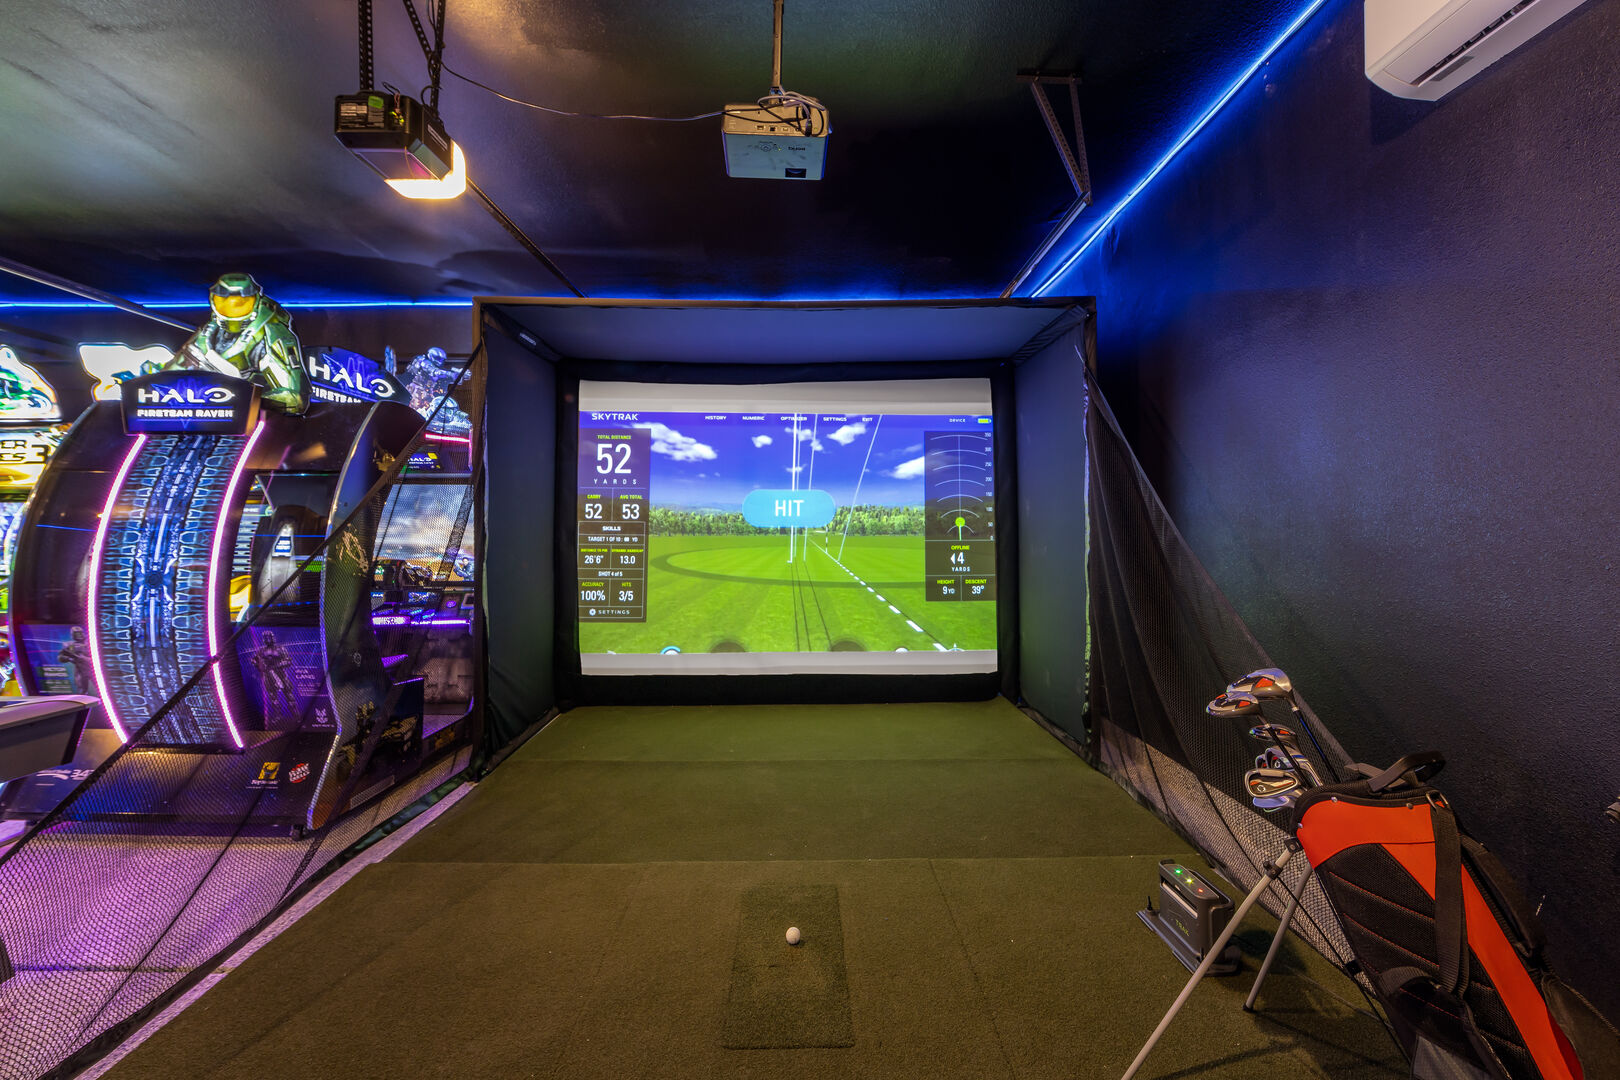 Tee off in style with our state-of-the-art golf simulator.